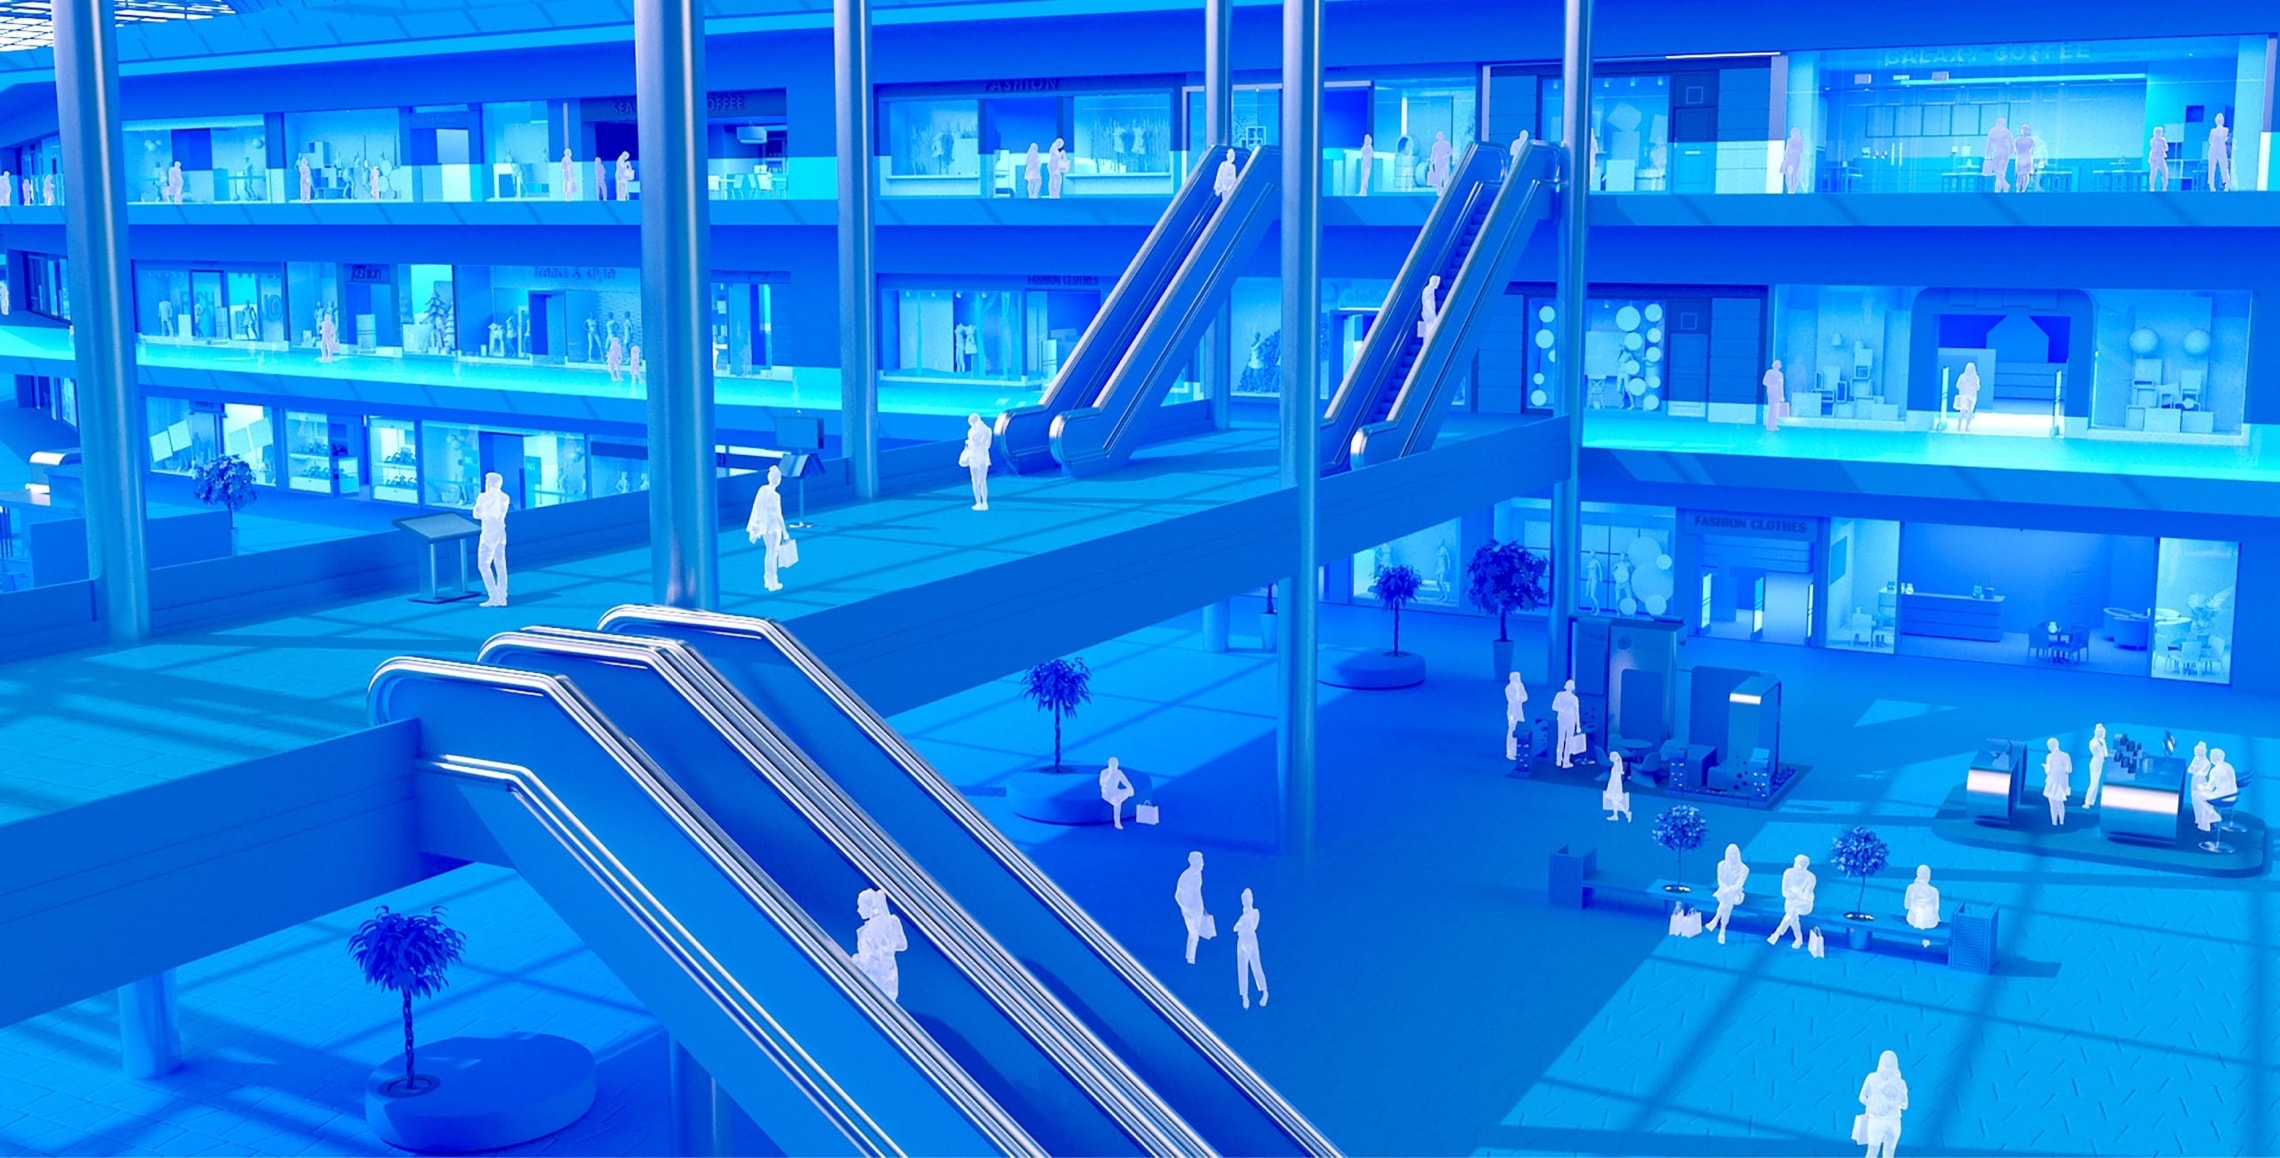 A 3d rendering of a building with escalators and people.